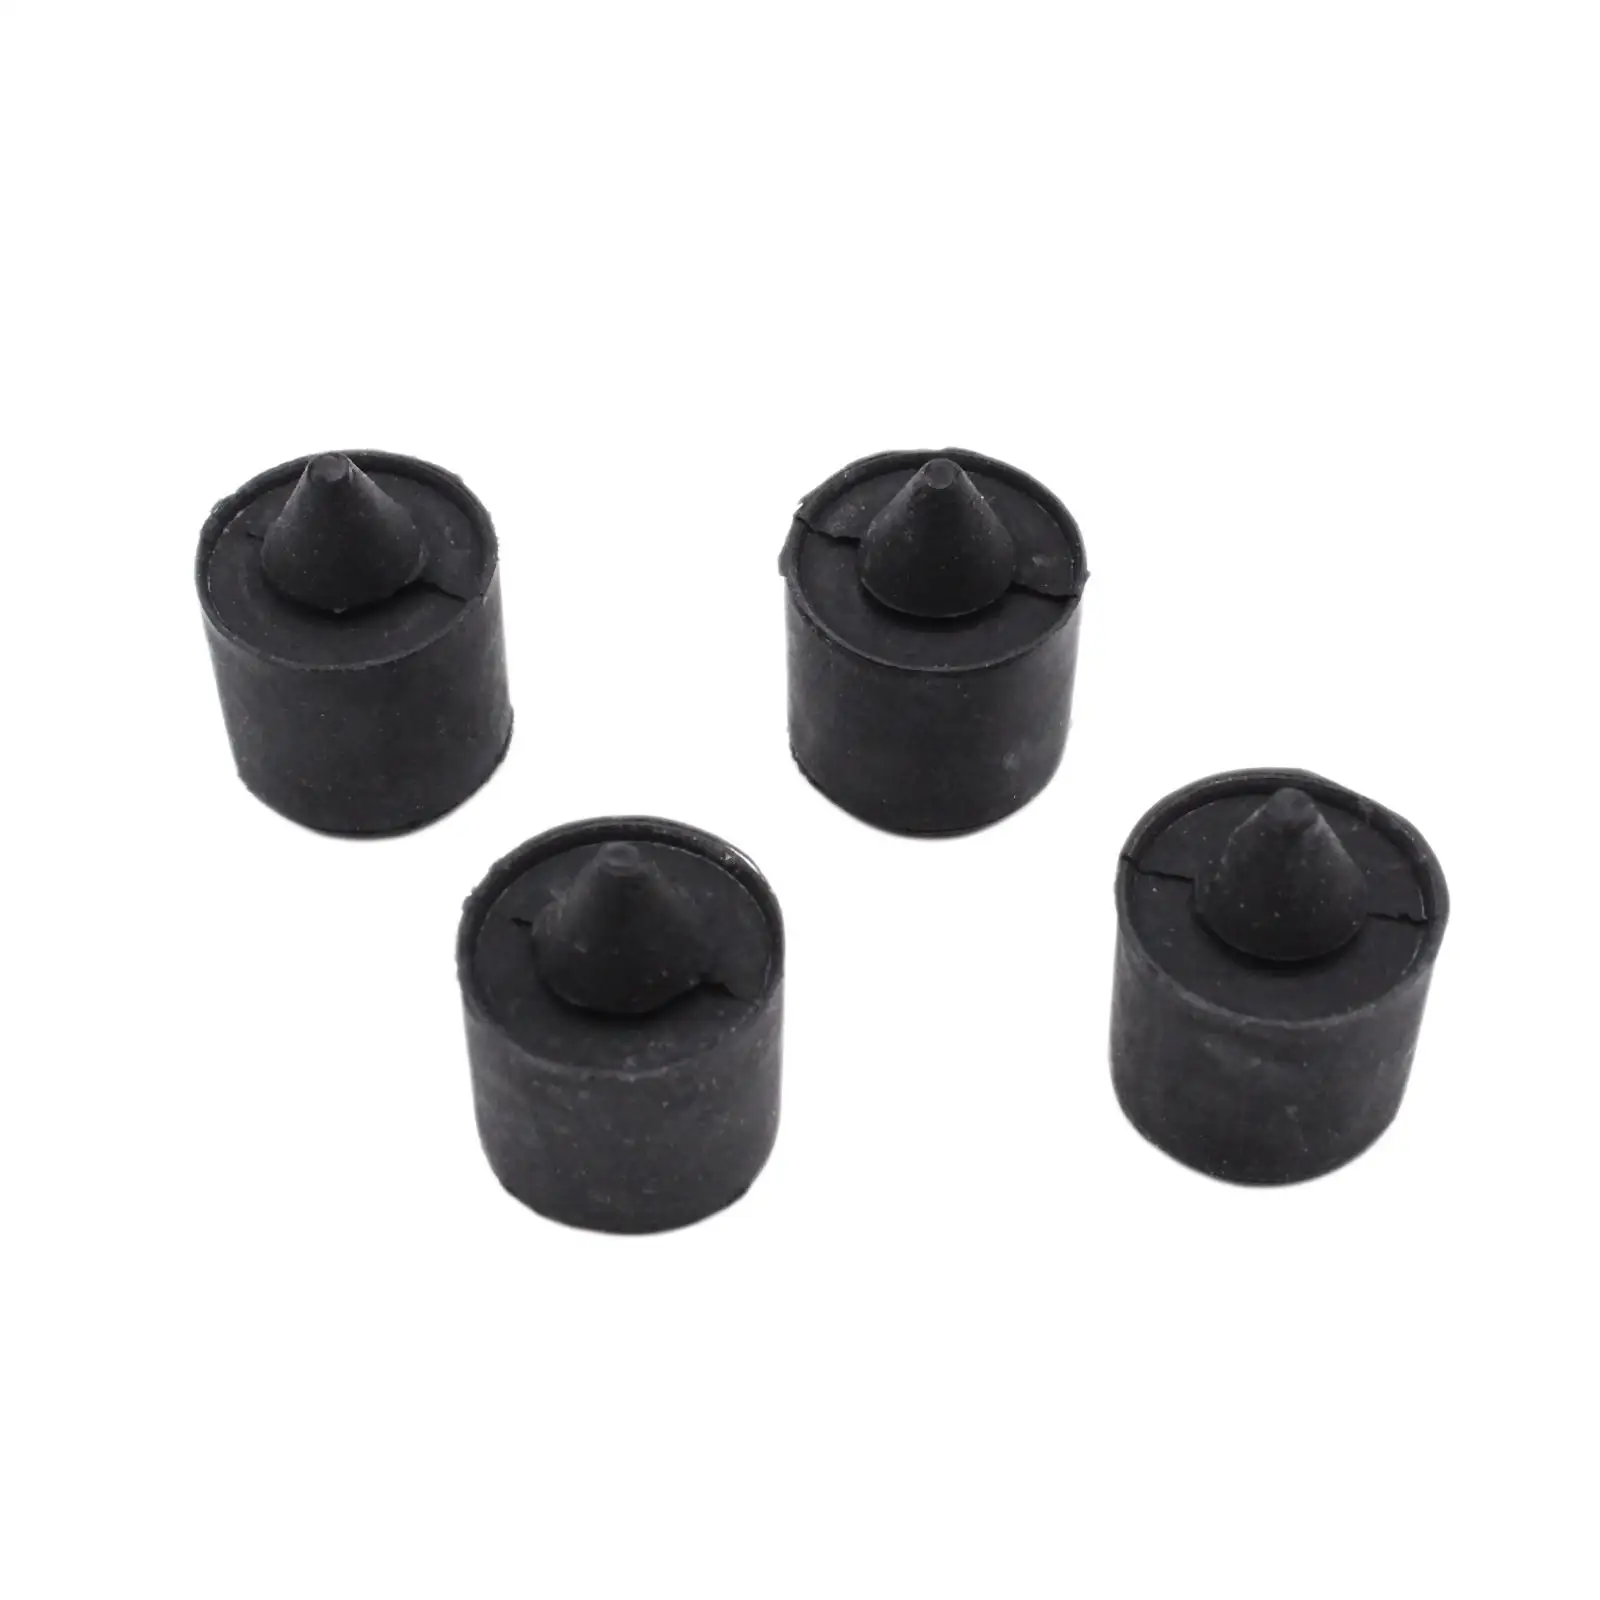 4 Pieces Vehicle 16.5mm Exterior Rubber Bumpers W705903S300 W705903-S300 Black for Ford F150 Escape Ranger Replace